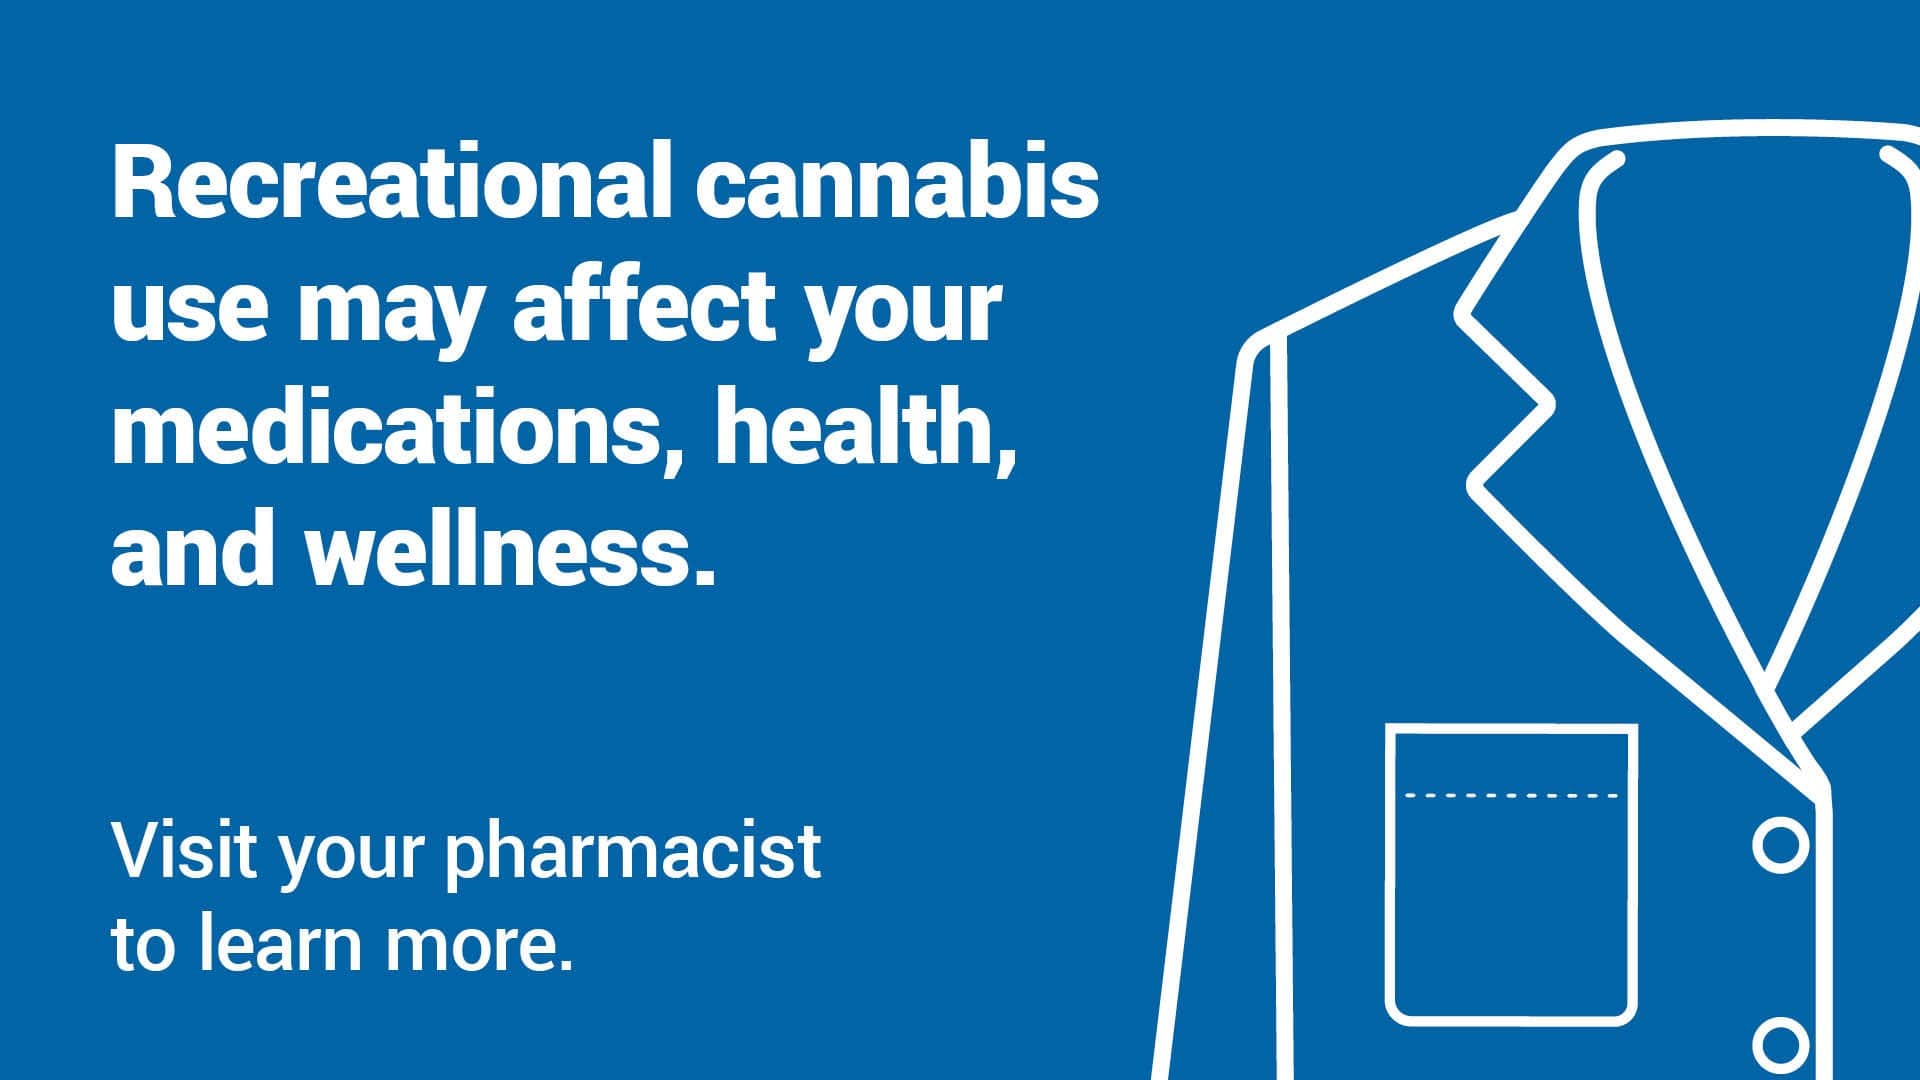 Recreational cannabis use may affect your medications, health, and wellness